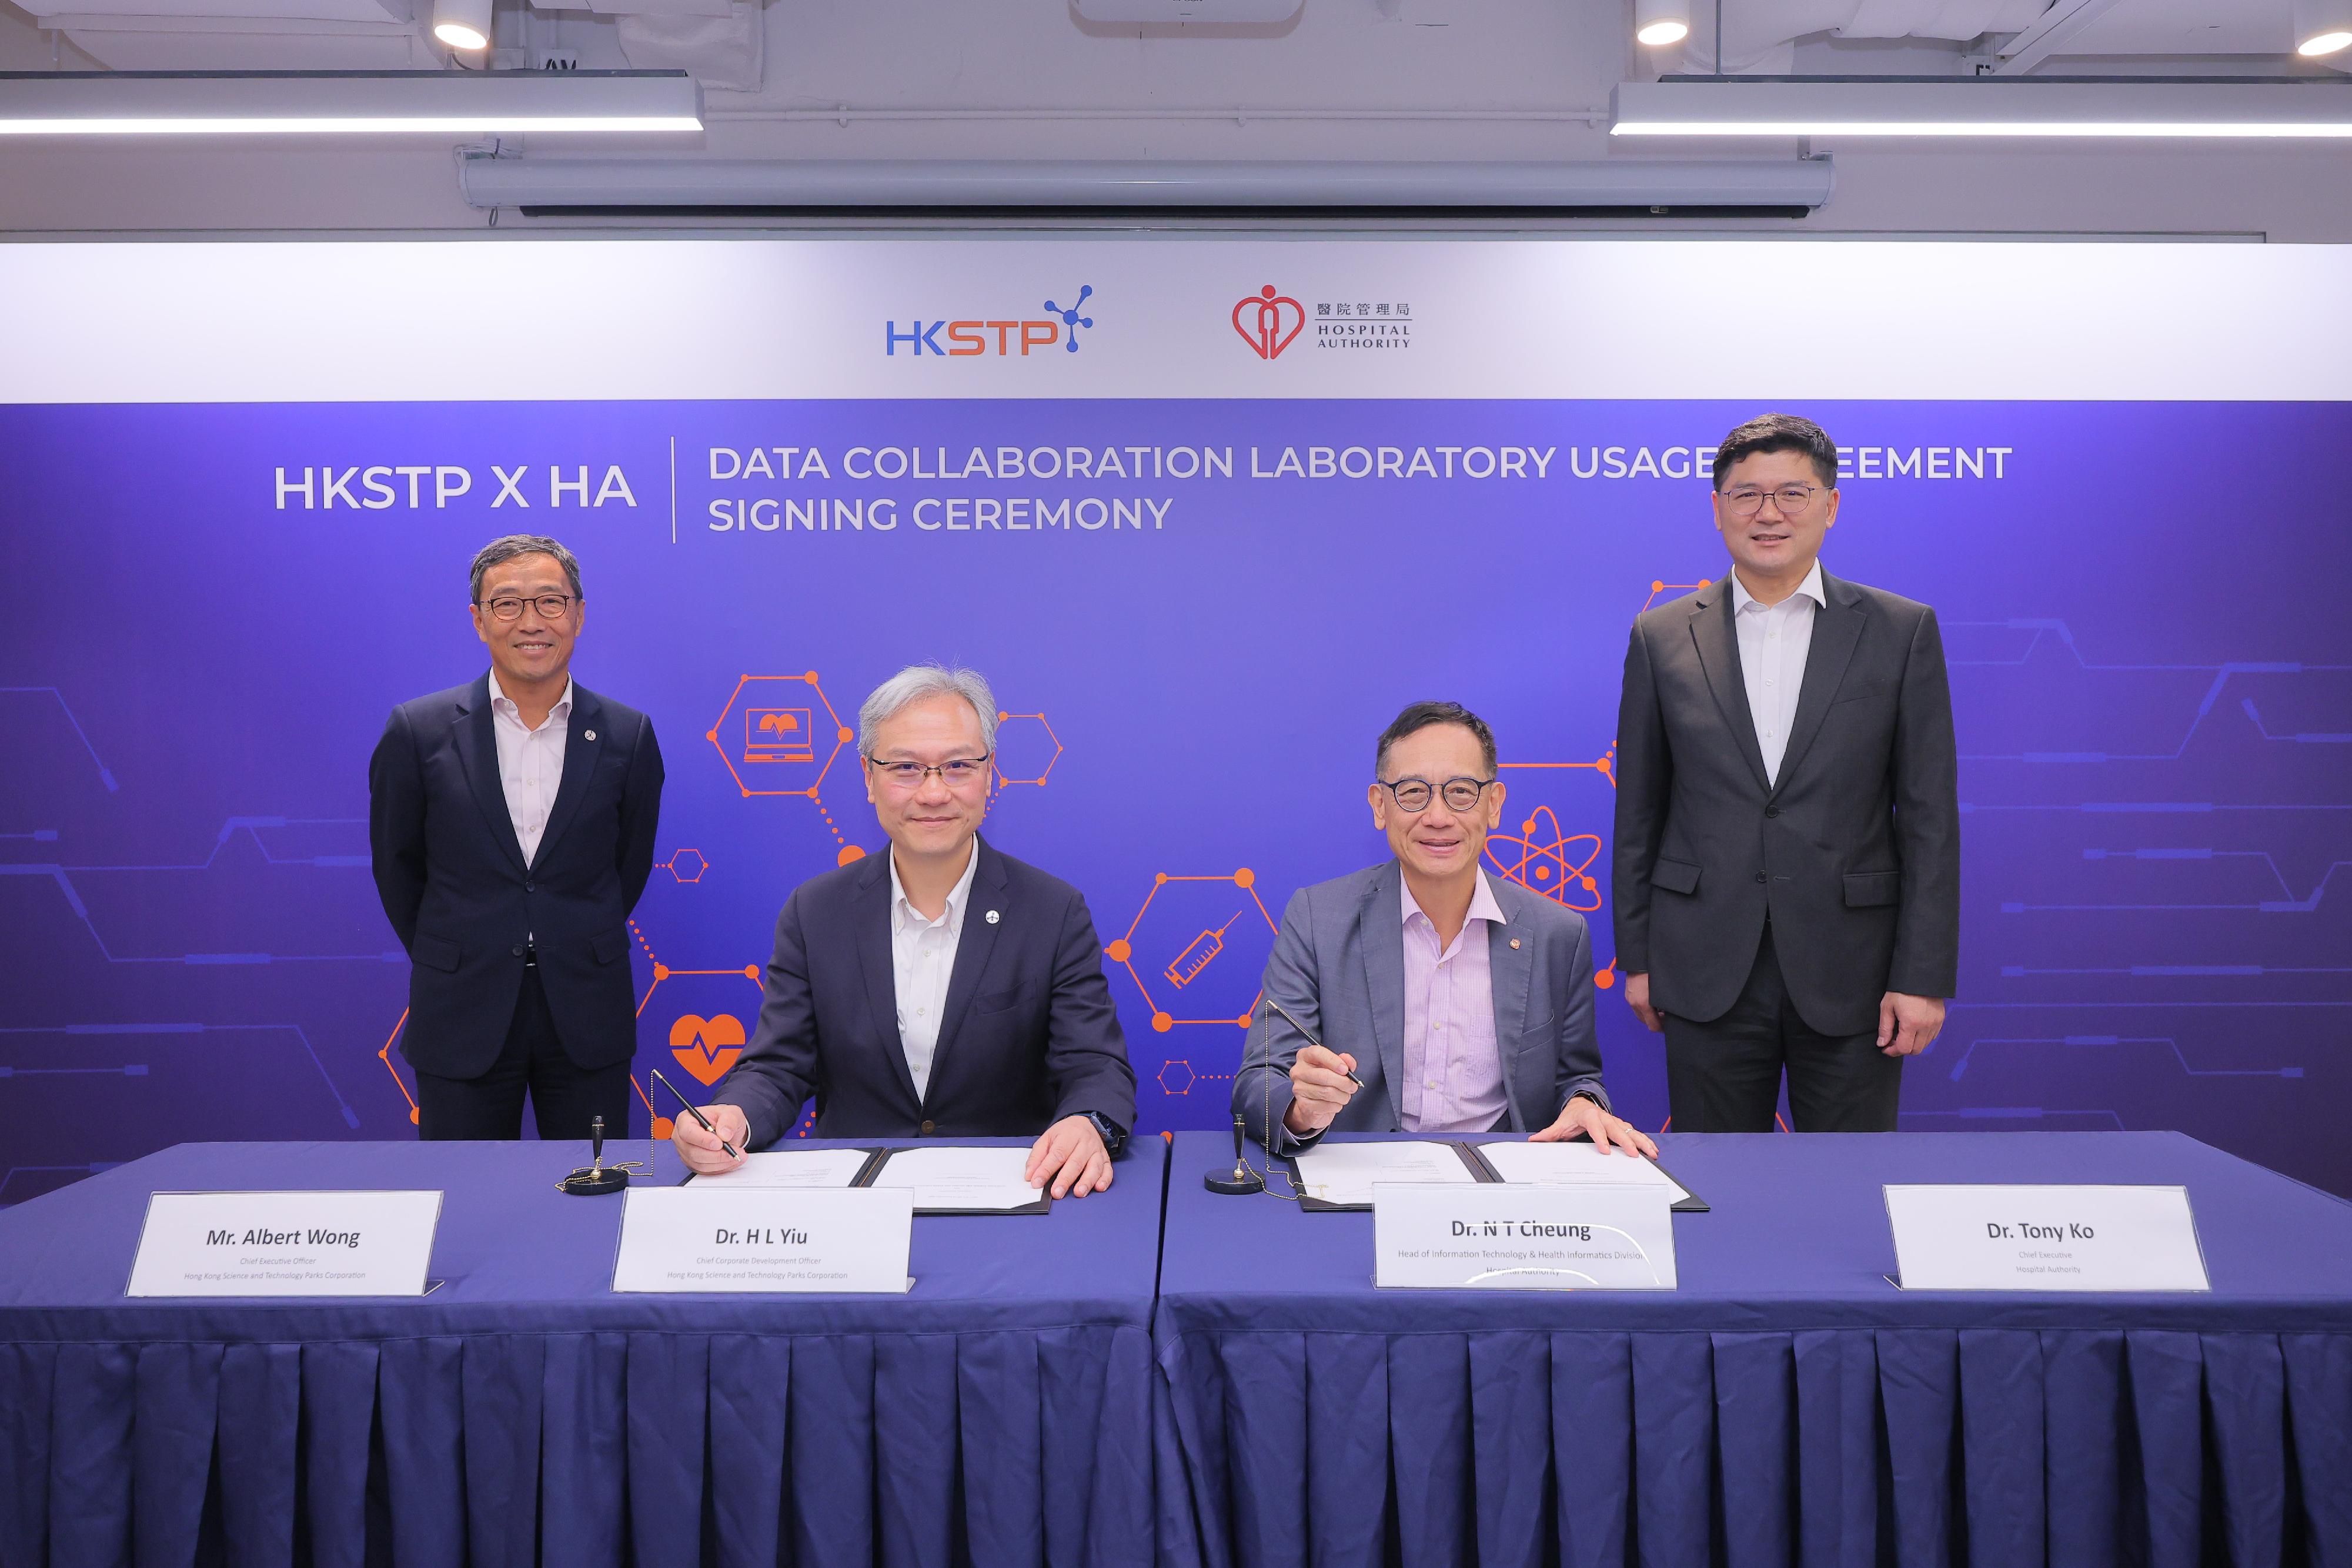 The Head of Information Technology and Health Informatics of the Hospital Authority (HA), Dr N T Cheung (second right), and the Chief Corporate Development Officer of the Hong Kong Science and Technology Parks Corporation (HKSTP), Dr H L Yiu (second left), signed an agreement under the witness of the Chief Executive of the HA, Dr Tony Ko (first right), and the Chief Executive Officer of the HKSTP, Mr Albert Wong (first left).